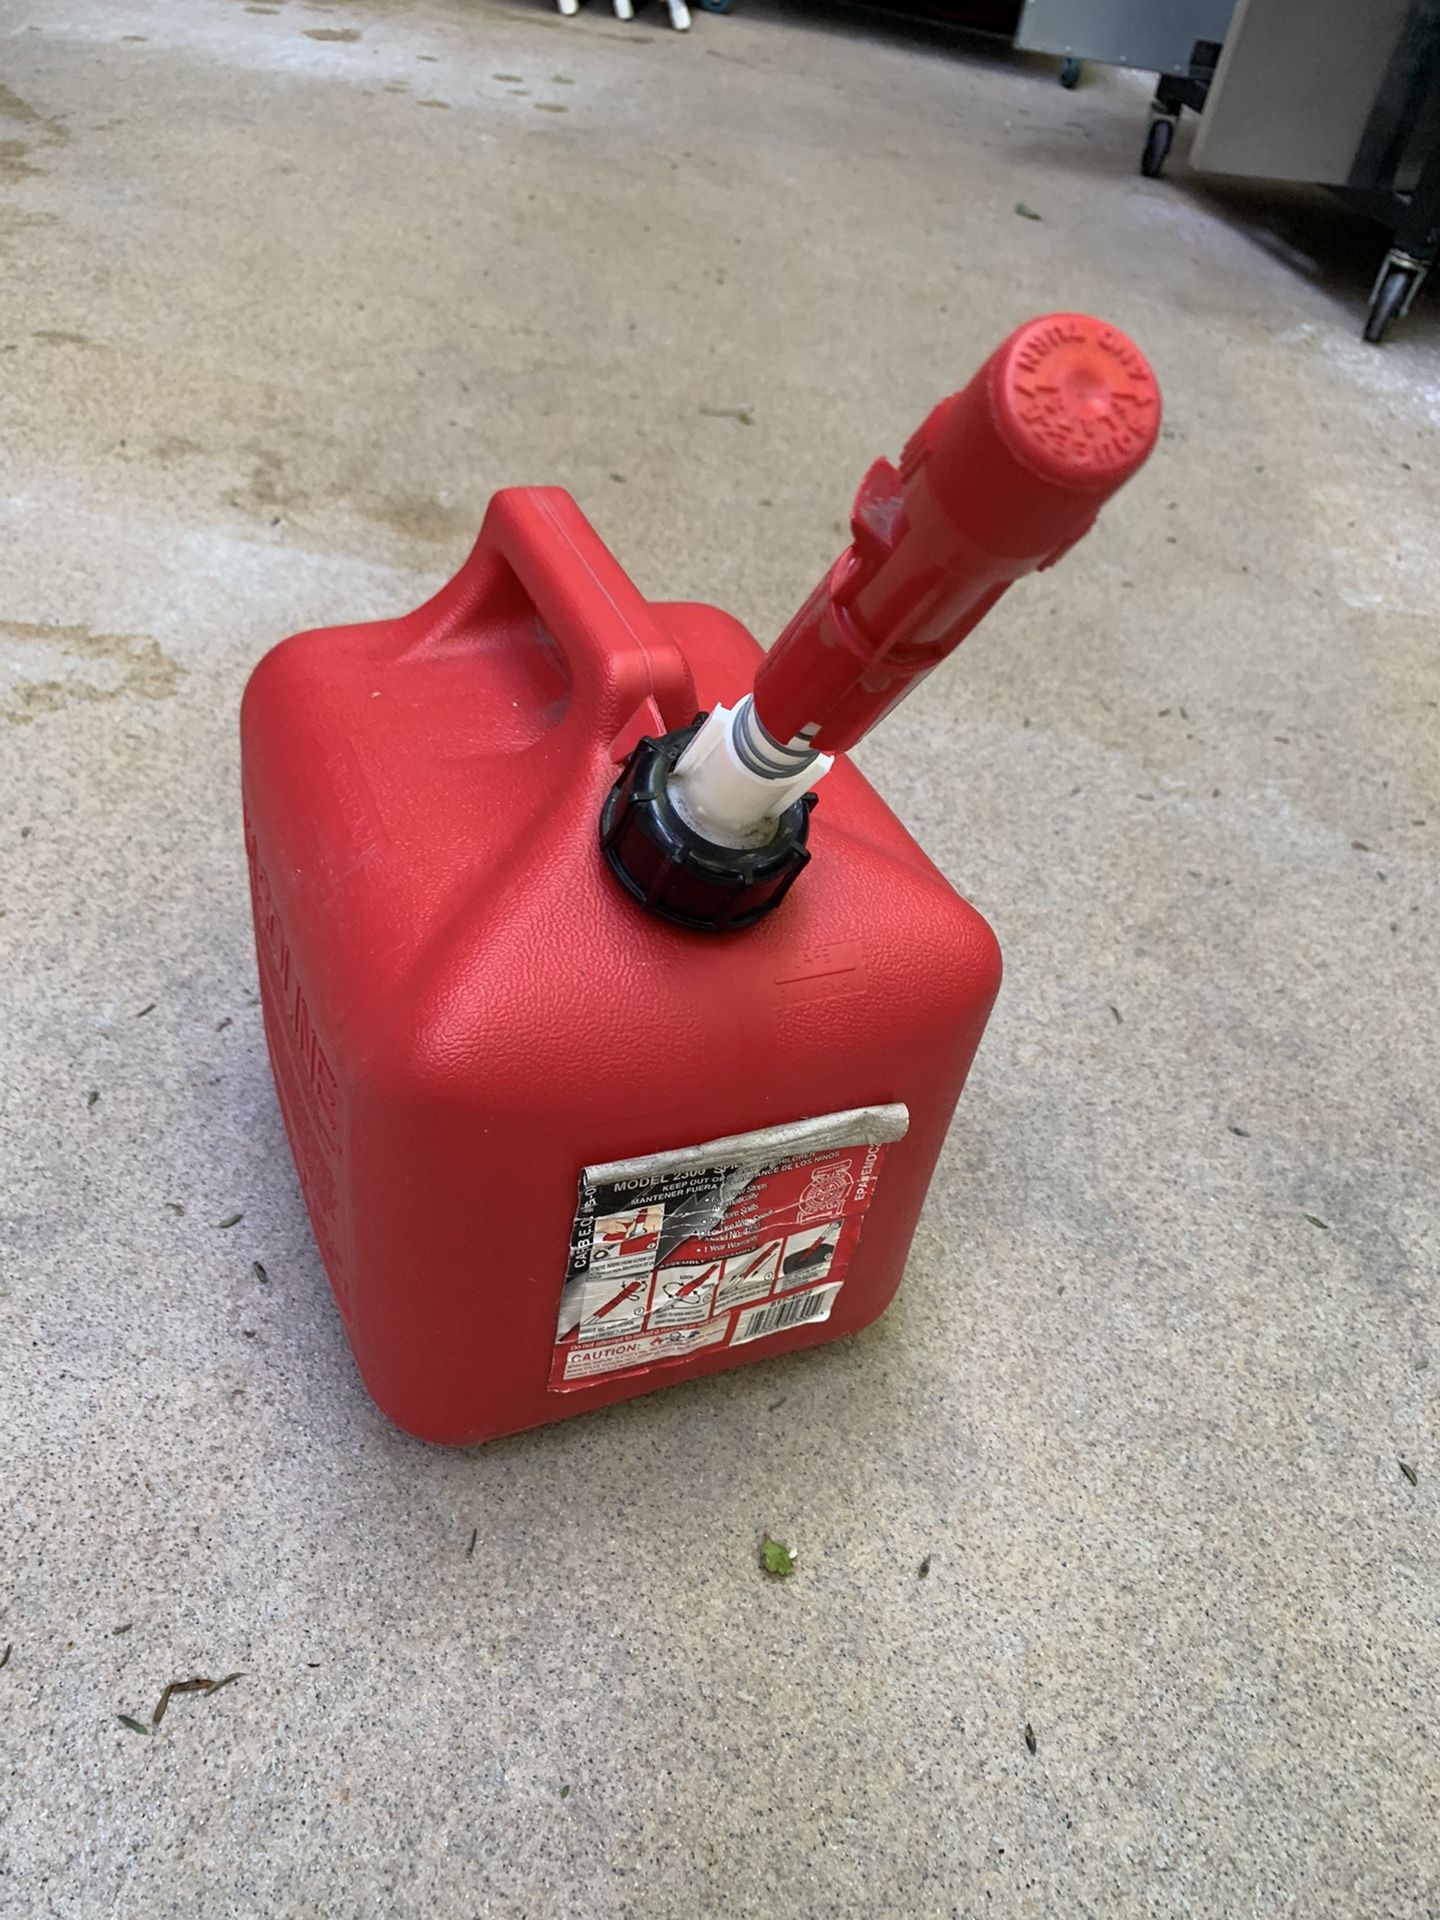 Full gas can. 2.5 gallons